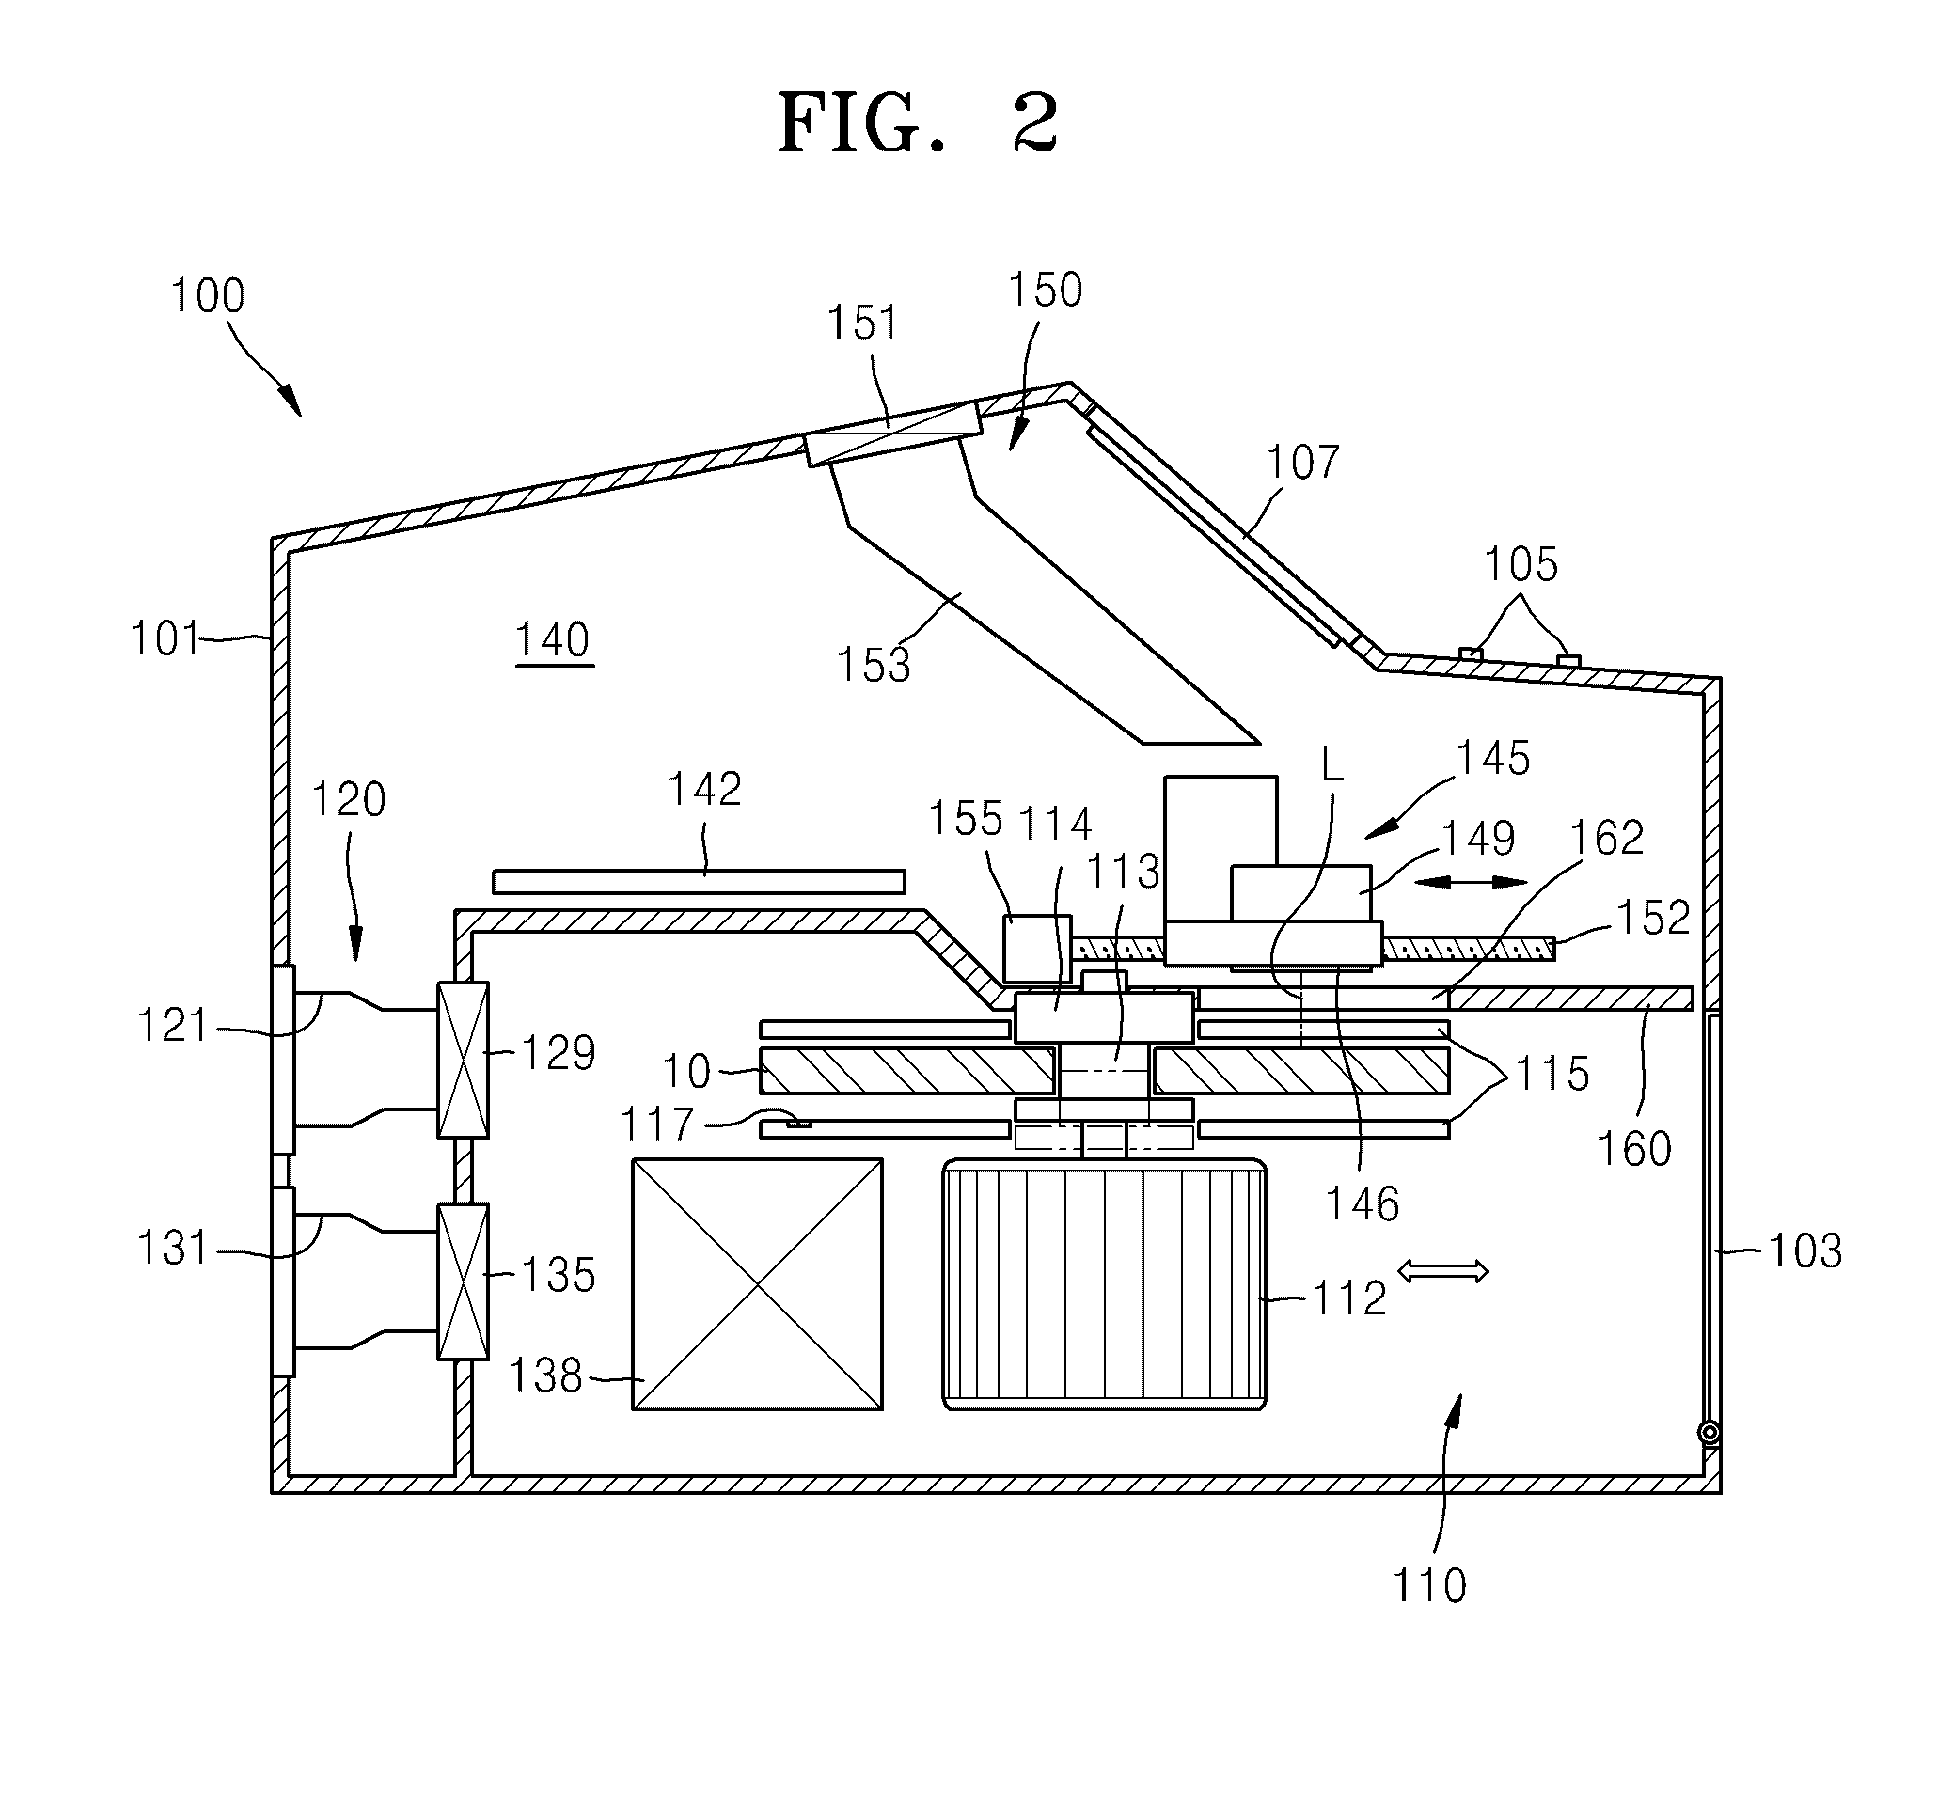 Biochemical analyzer and method of controlling internal temperature of the biochemical analyzer